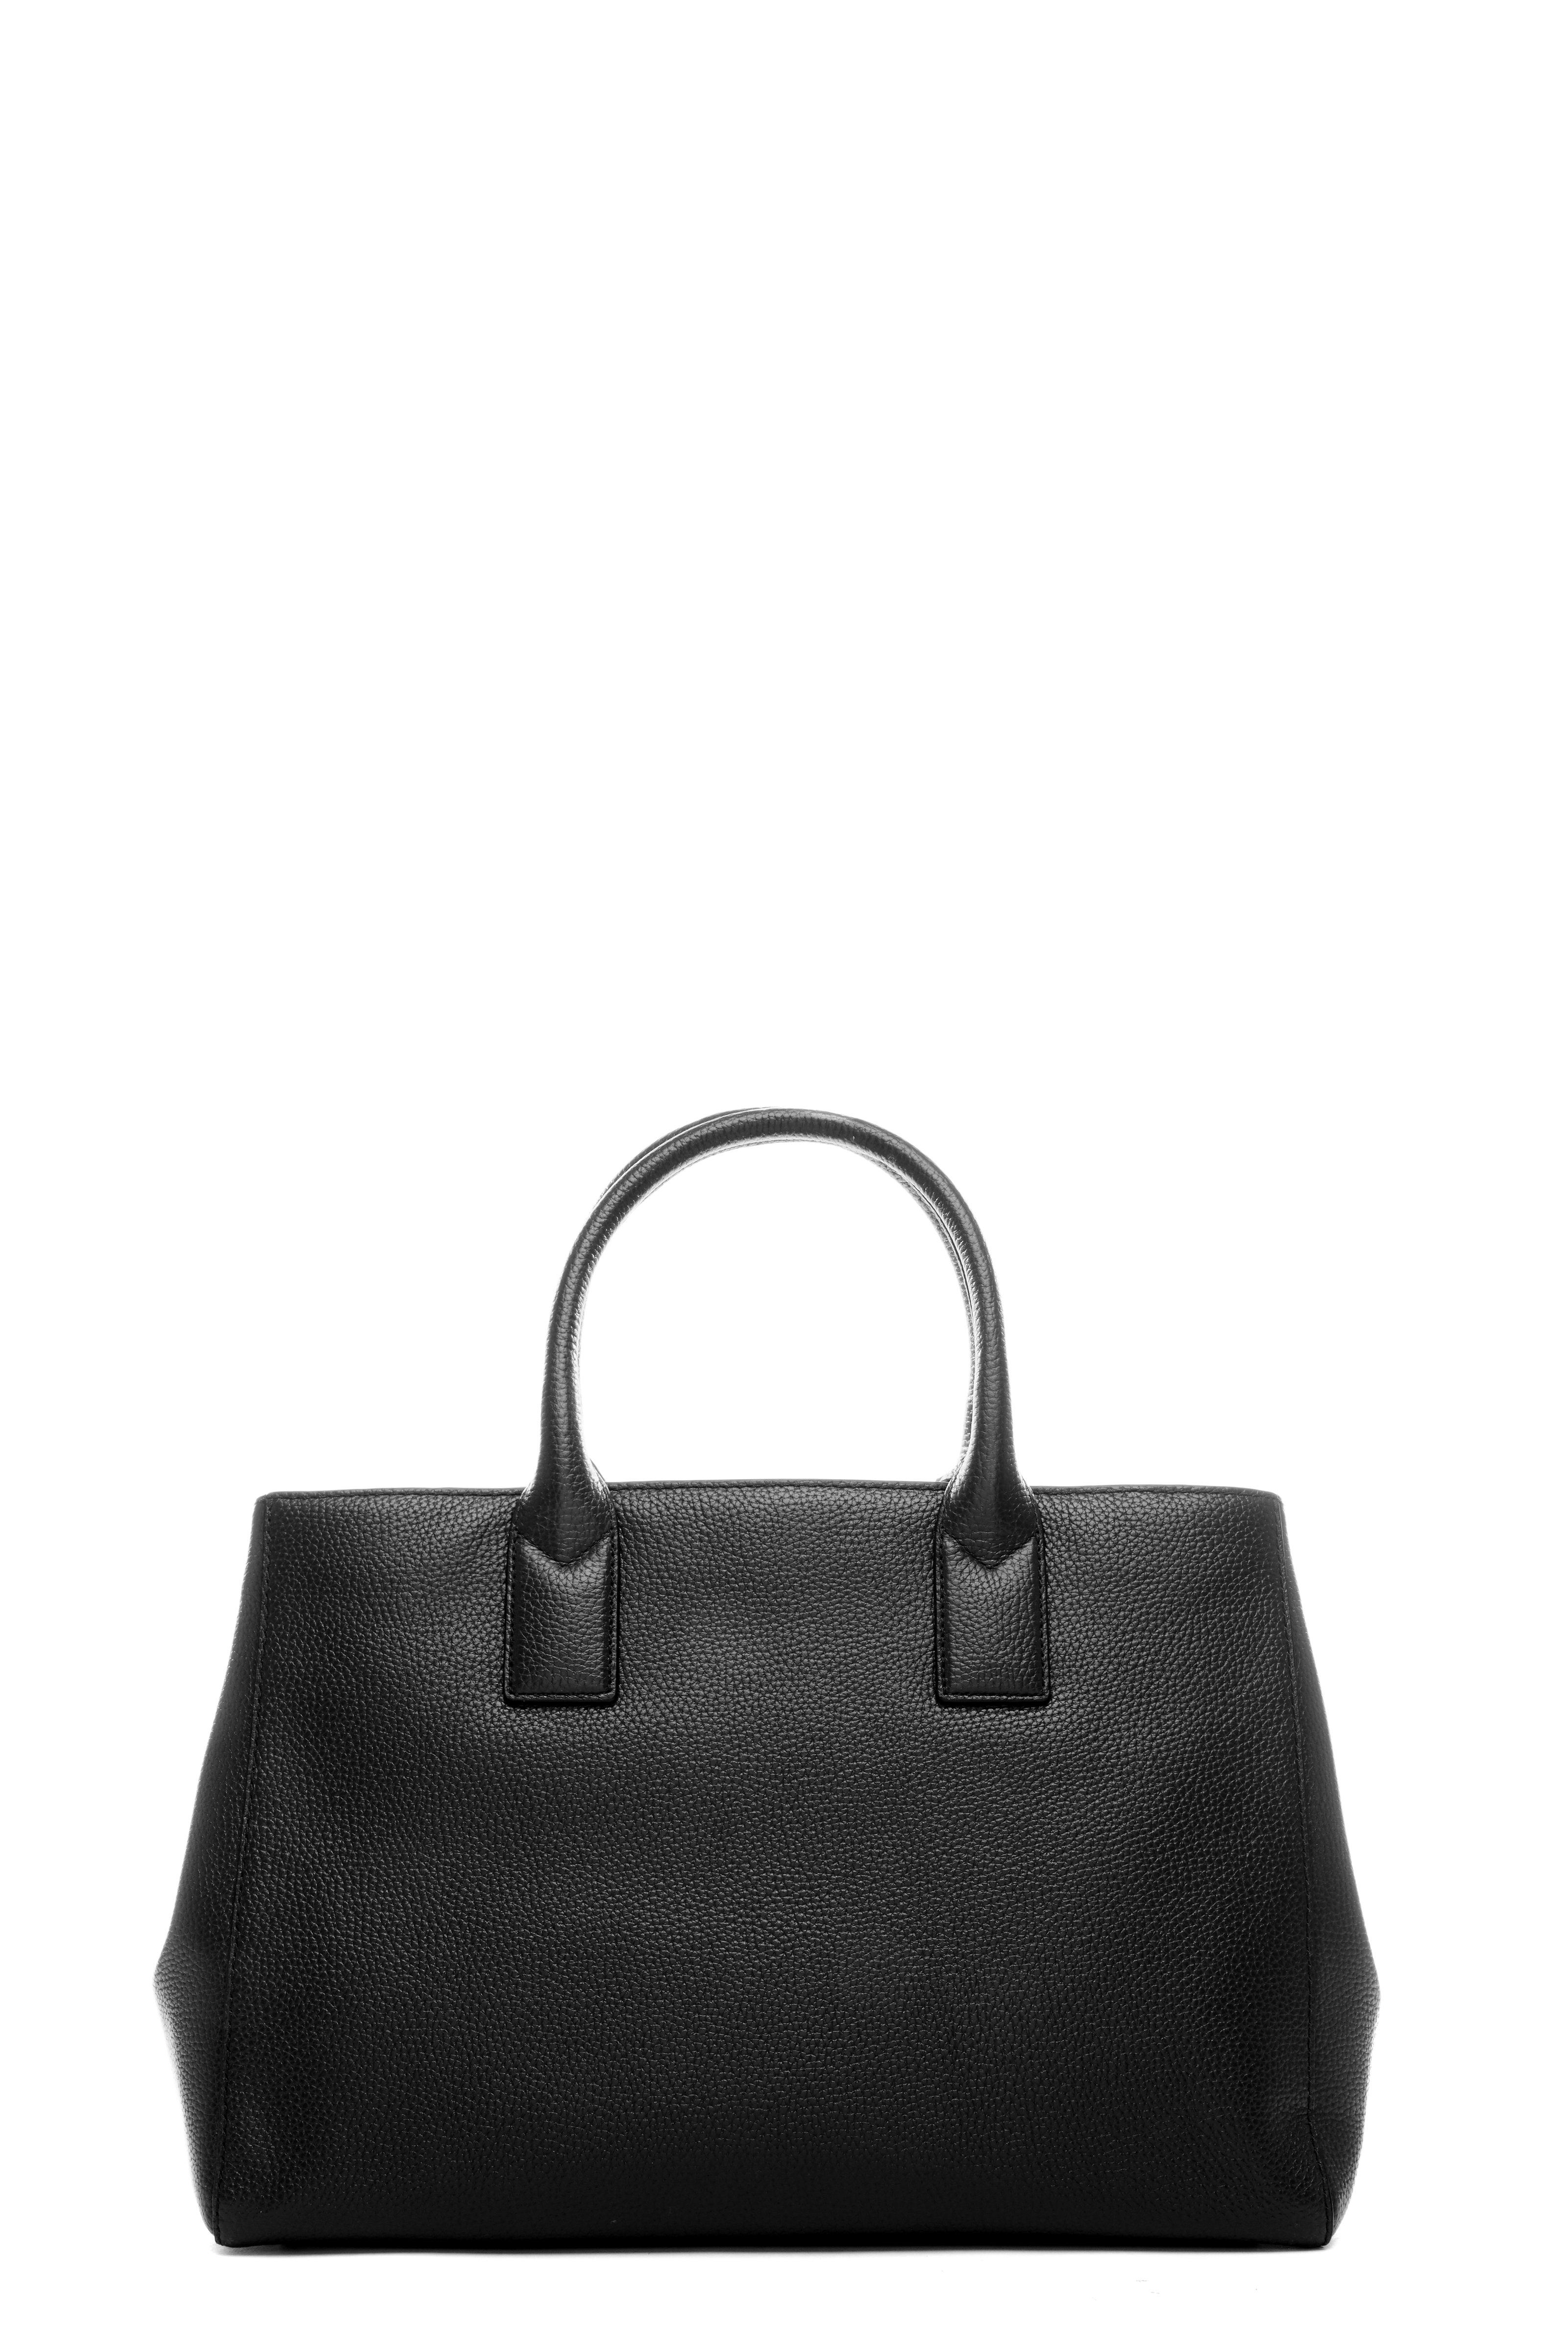 MARC JACOBS 'Gotham' East/West Pebbled Leather Tote in Black | ModeSens